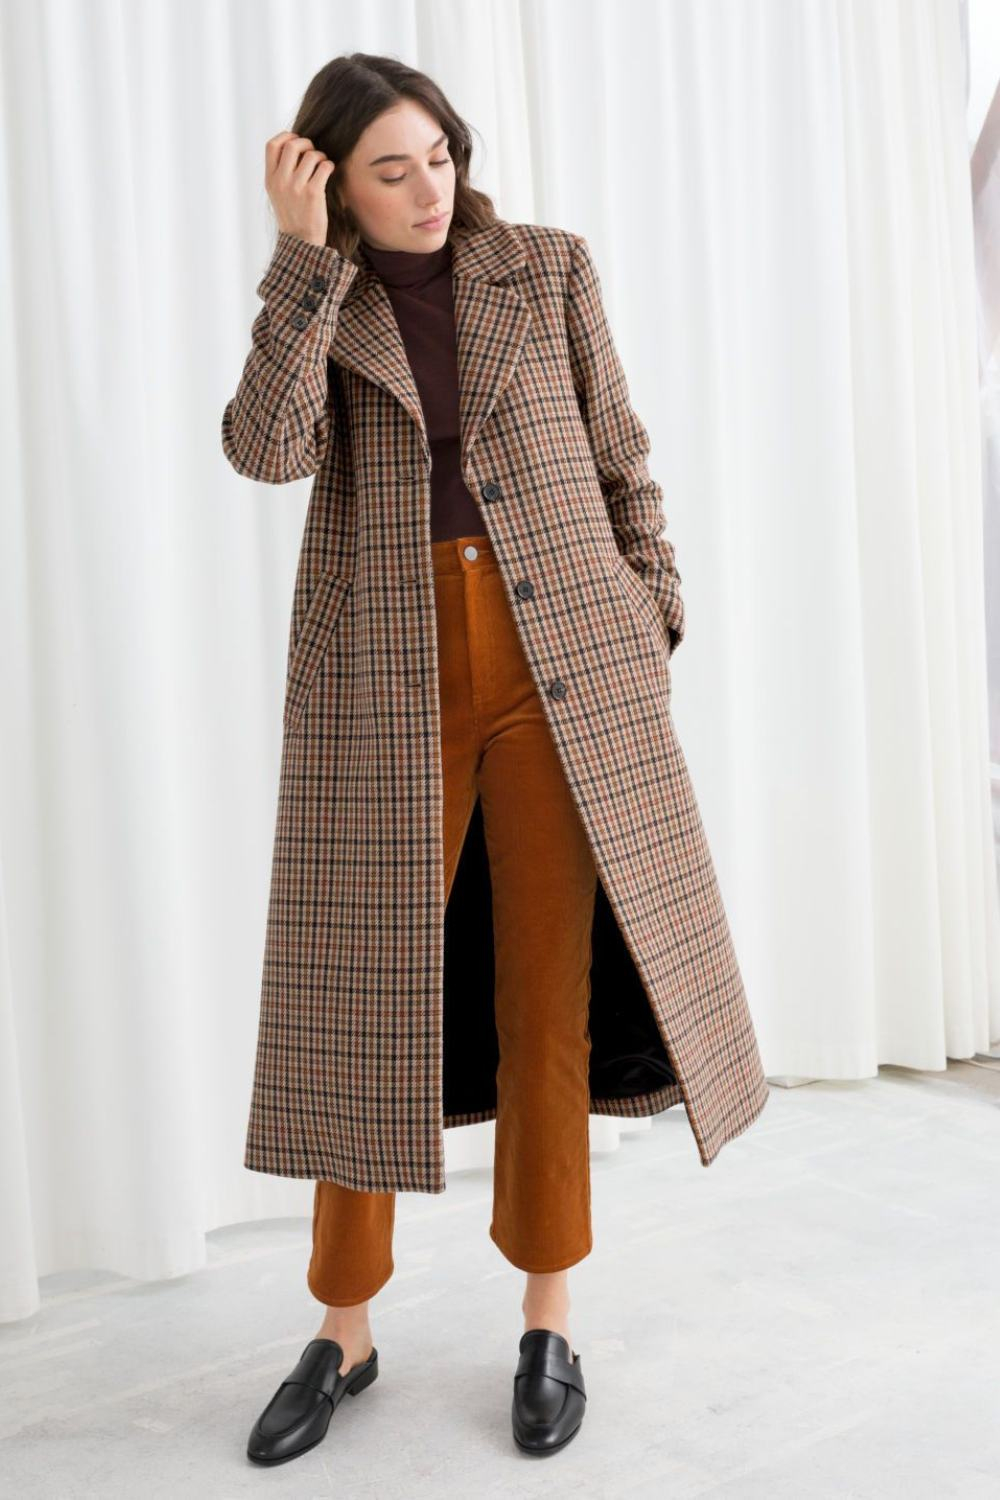 Plaid Coat Outfit with Corduroy pants and loafer mules